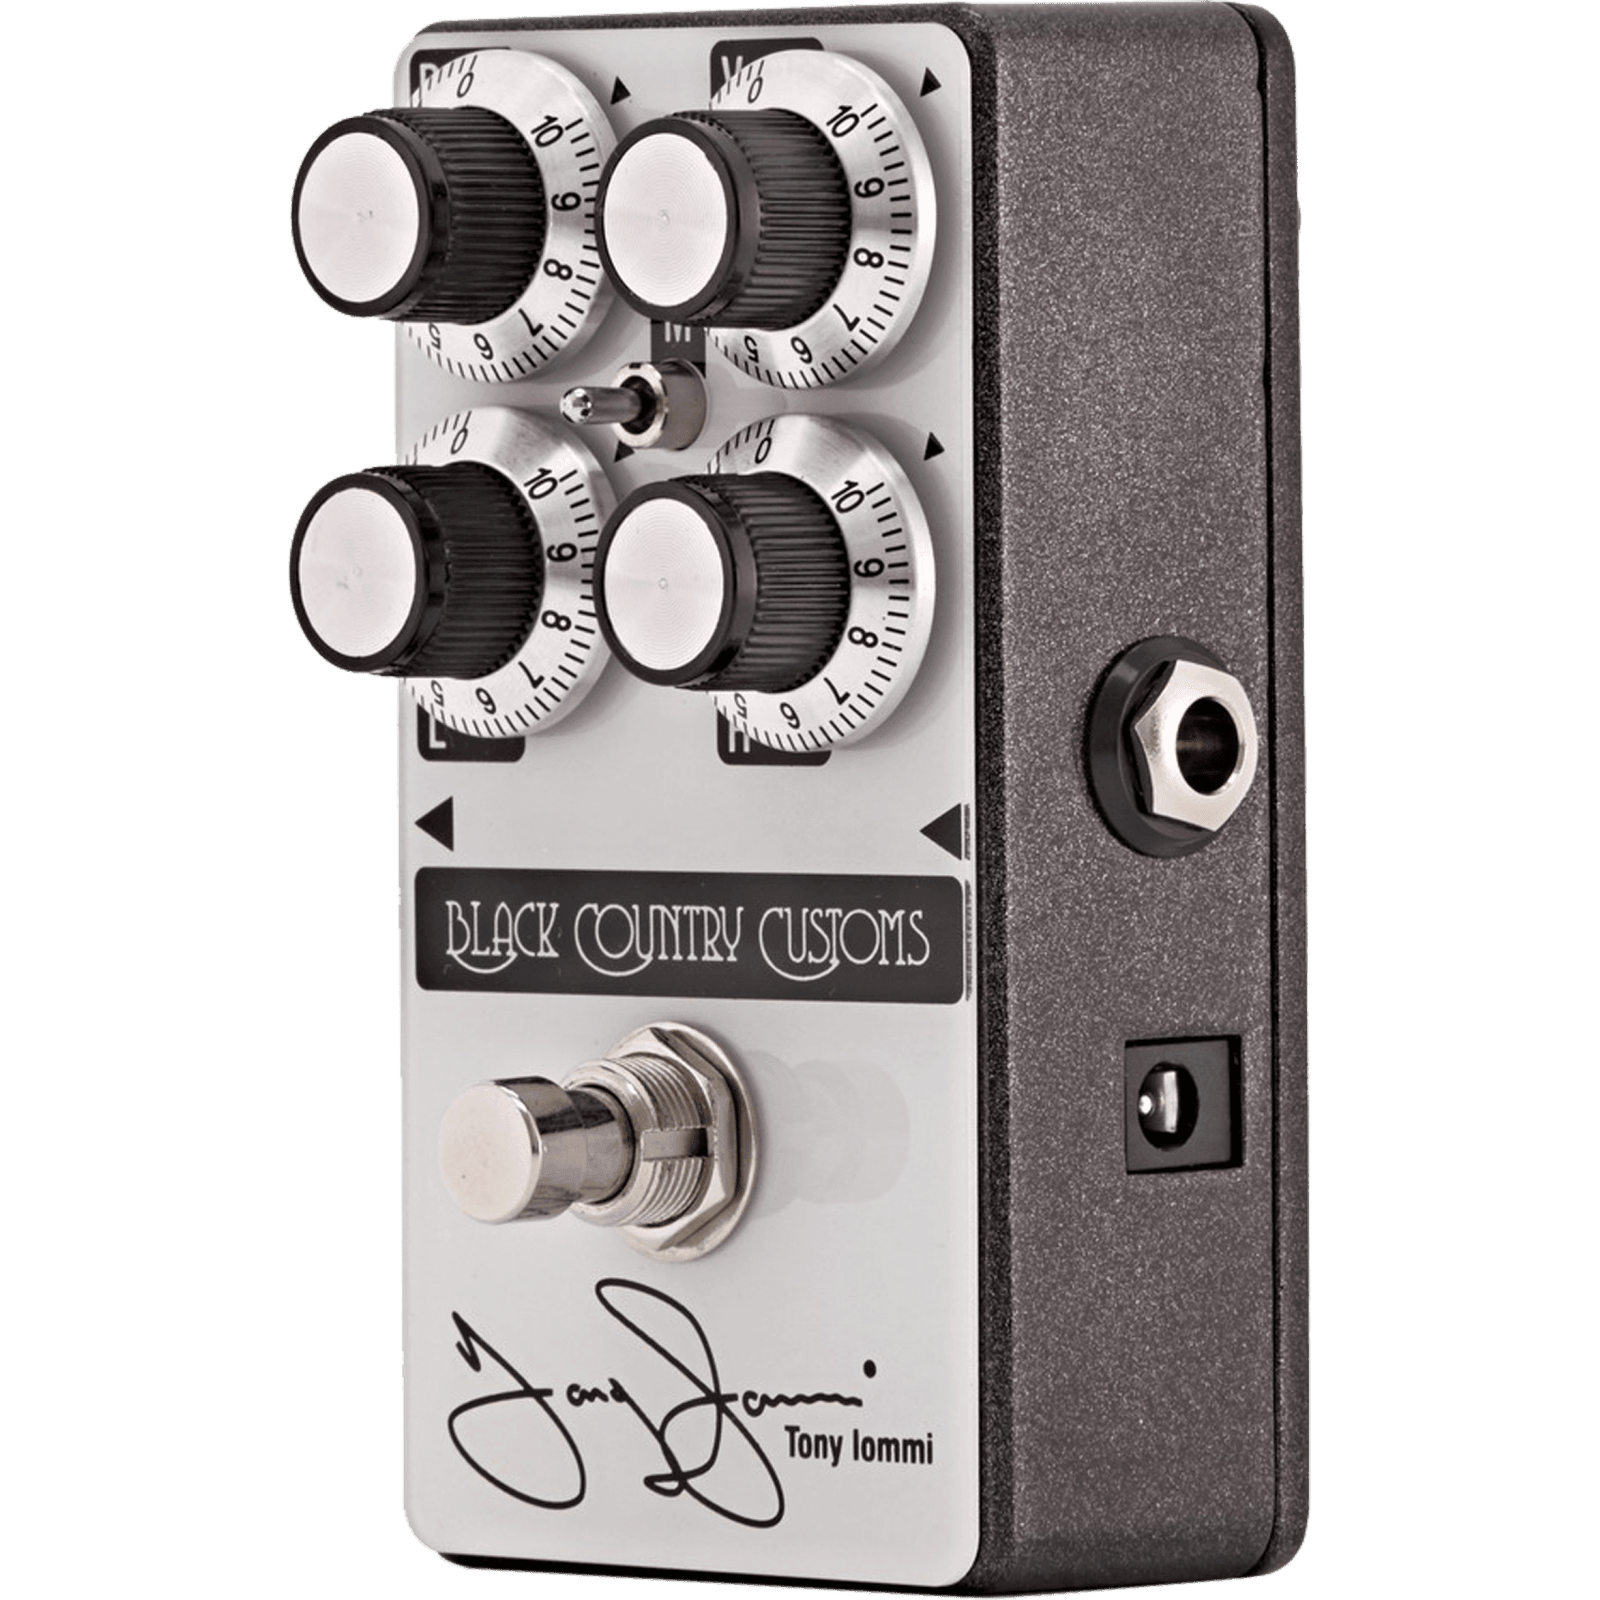 Tony Iommi Signature Boost Pedal - Guitar - Effects Pedals by Laney at Muso's Stuff